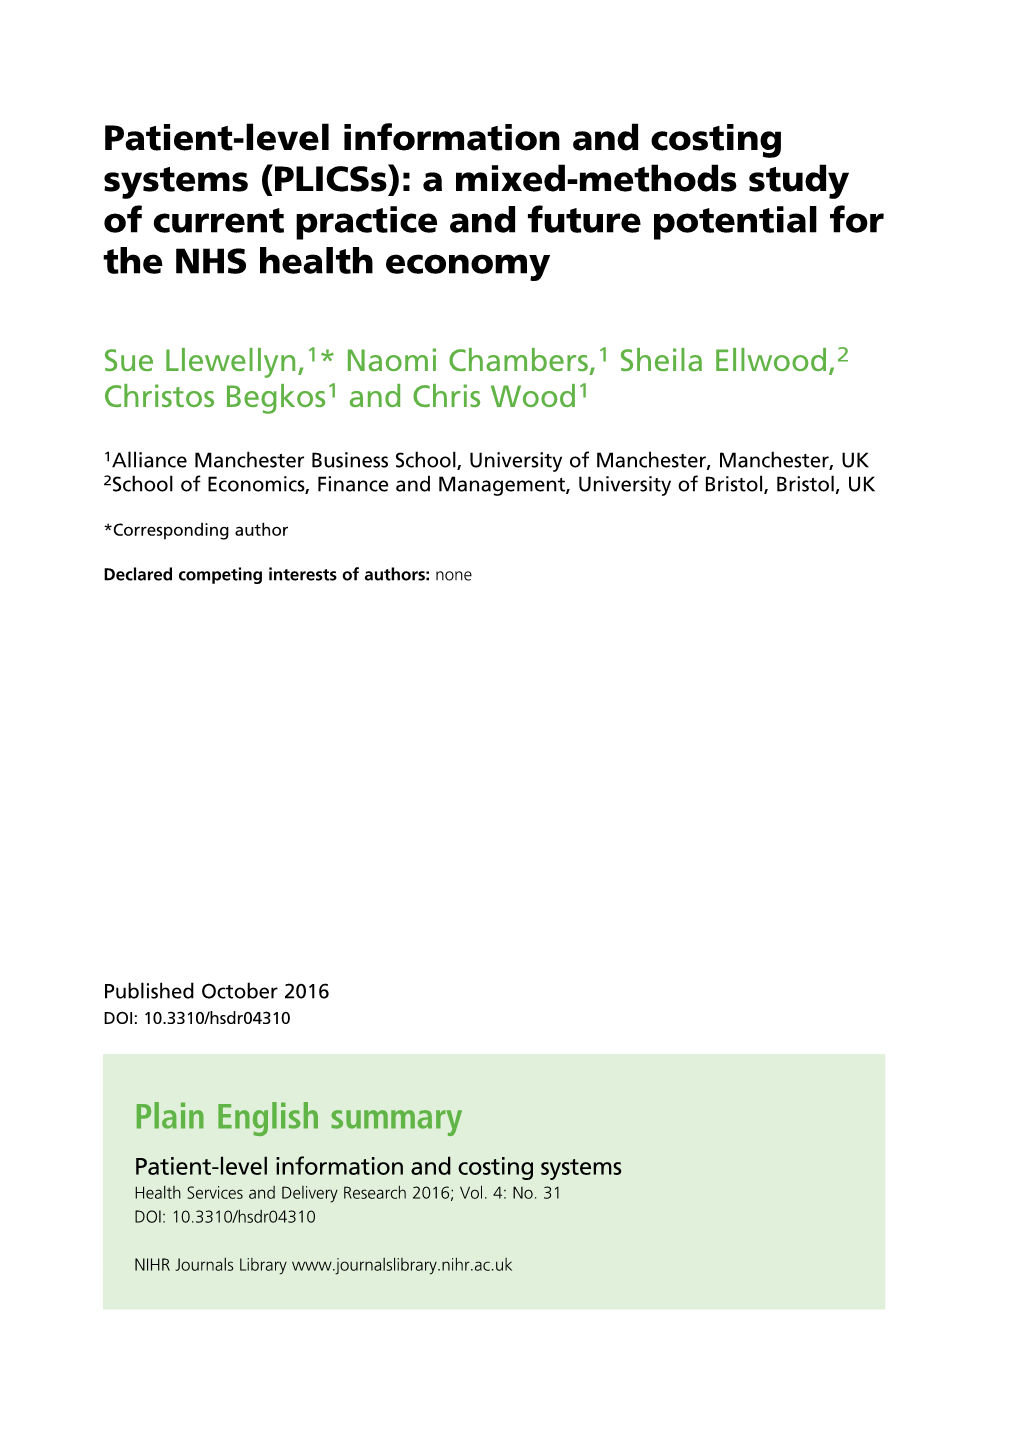 Patient-Level Information and Costing Systems (Plicss): a Mixed-Methods Study of Current Practice and Future Potential for the NHS Health Economy